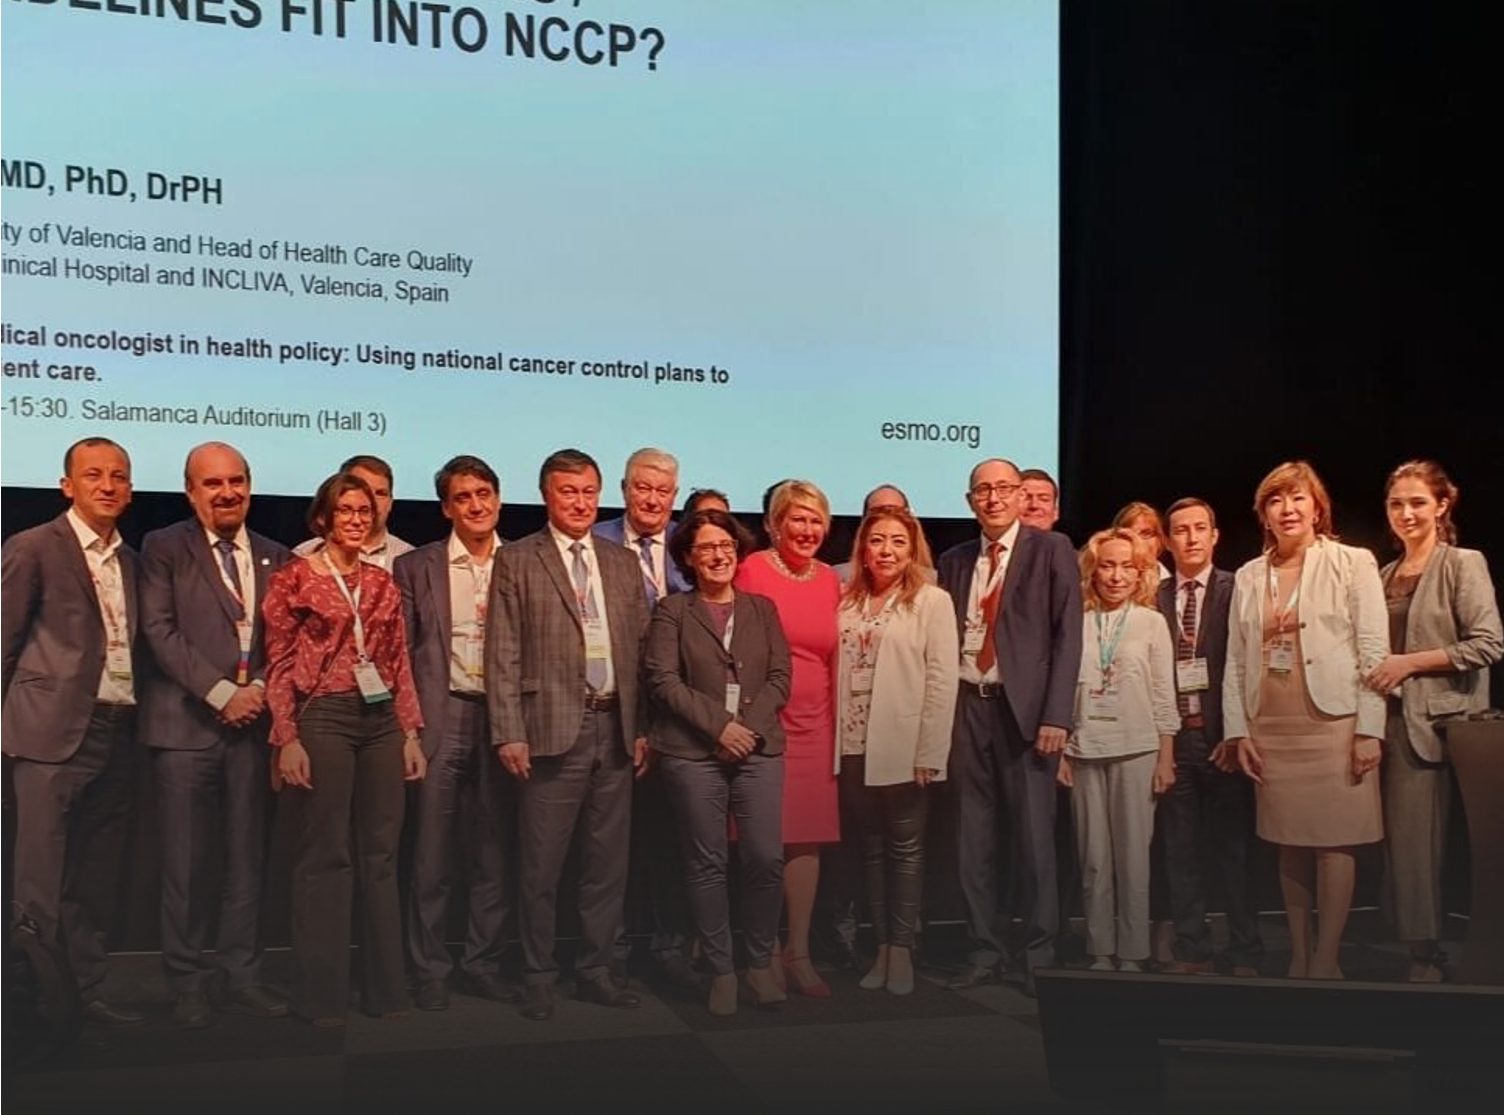 2019: AECA unites leading cancer control experts from Russian Federation, Uzbekistan, Belarus, Latvia, and Kazakhstan at ESMO national cancer control planning session in Barcelona, Spain